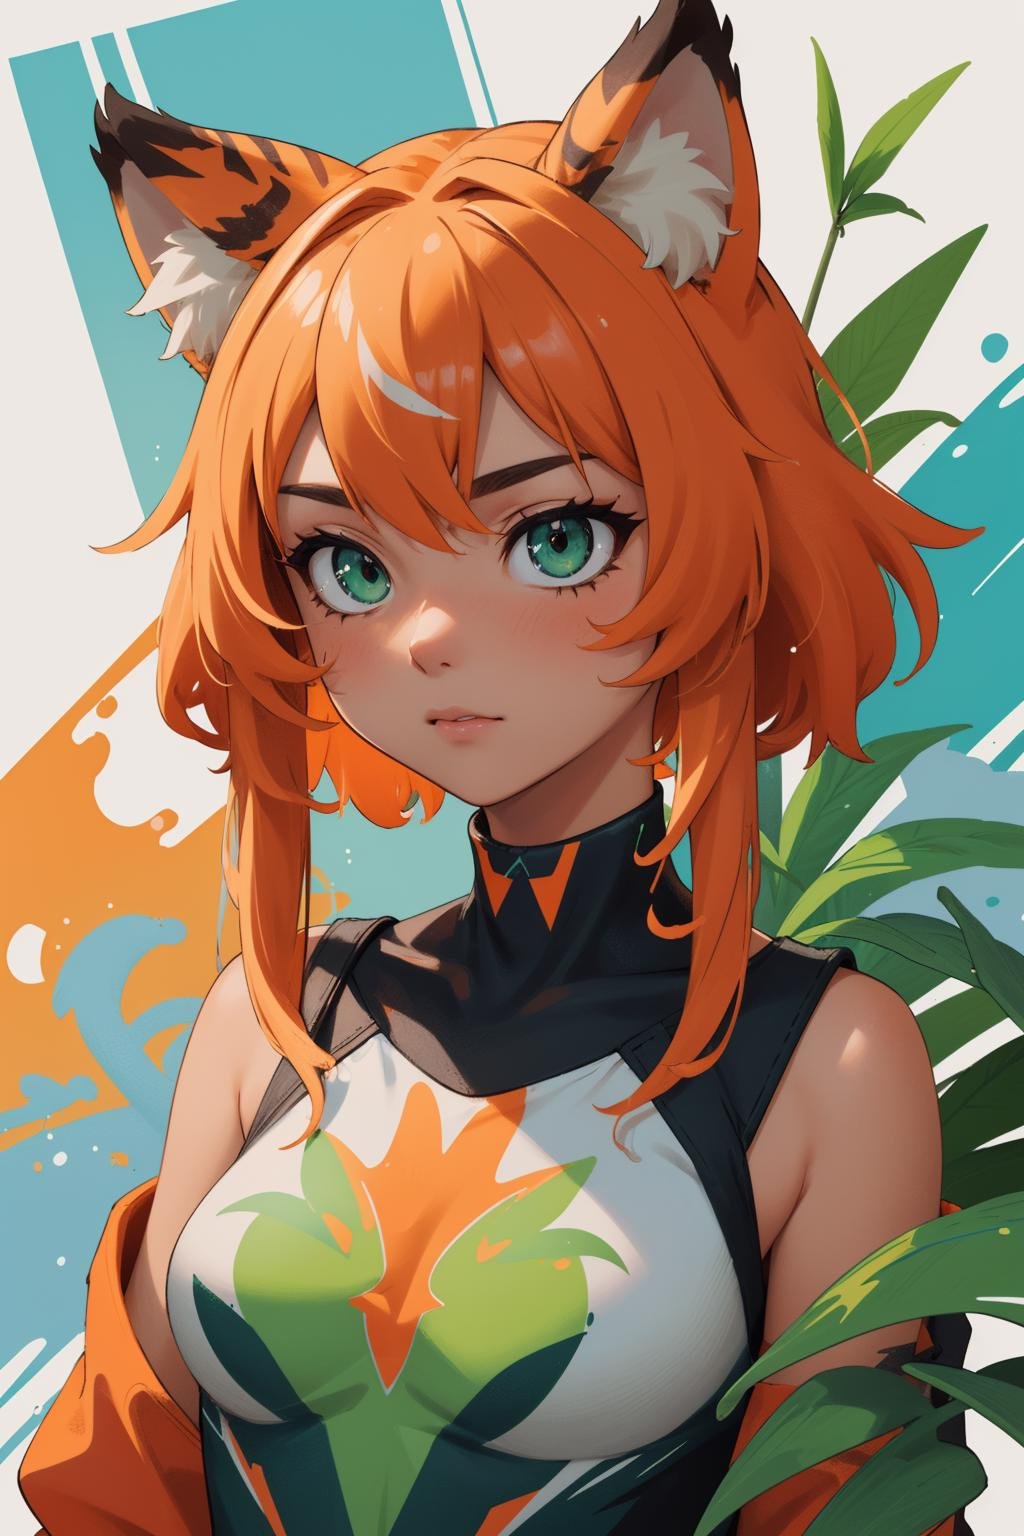 (masterpiece:1.1), (highest quality:1.1), (HDR:1.0), extreme quality, cg, (negative space), detailed face+eyes, 1girl, fox ears, animal ear fluff, (plants:1.18), (fractal art), (bright colors), splashes of color background, colors mashing, paint splatter, complimentary colors, neon, (thunder tiger), compassionate, electric, limited palette, synthwave, fine art, tan skin, upper body, (green and orange:1.2), time stop, sy3, SMM